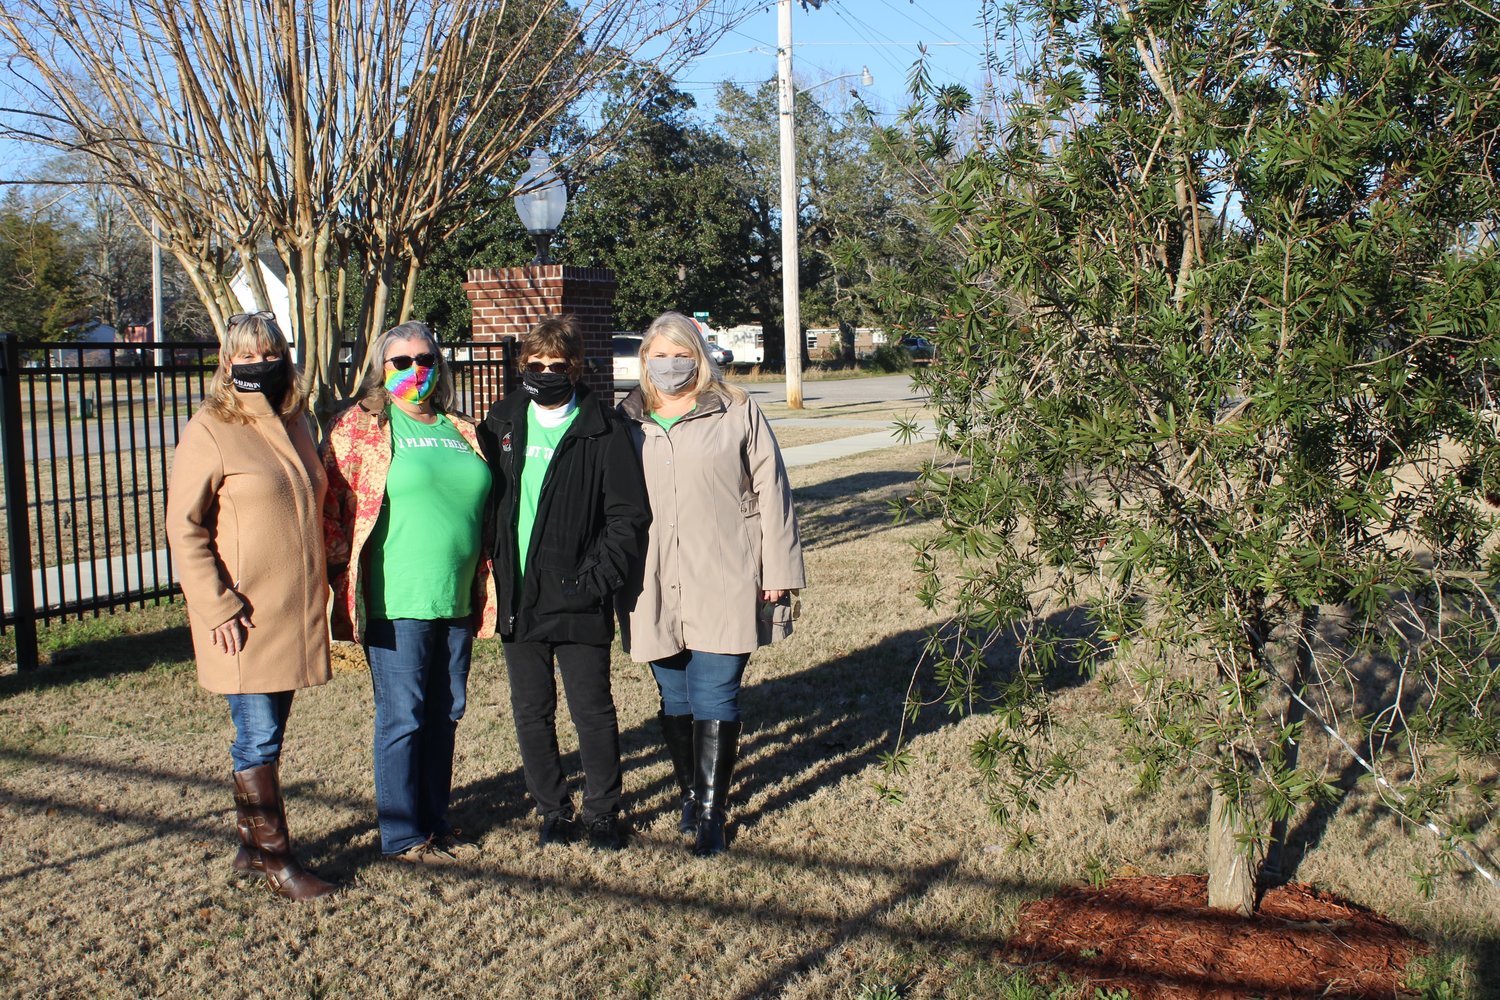 Members of the Robertsdale Park, Street and Tree Committee are pictured with one of this year’s tree, a bottle brush. A second bottle brush tree was also planted in Honeybee Park for the annual Arbor Day celebration. Pictured are, from left, Ruthie Campbell, June Salac, Sue Cooper and Amanda Brill. Committee members not pictured are Chairman Sonja Connor, Cindy Adams, Nell Calloway and Jodee Darby.